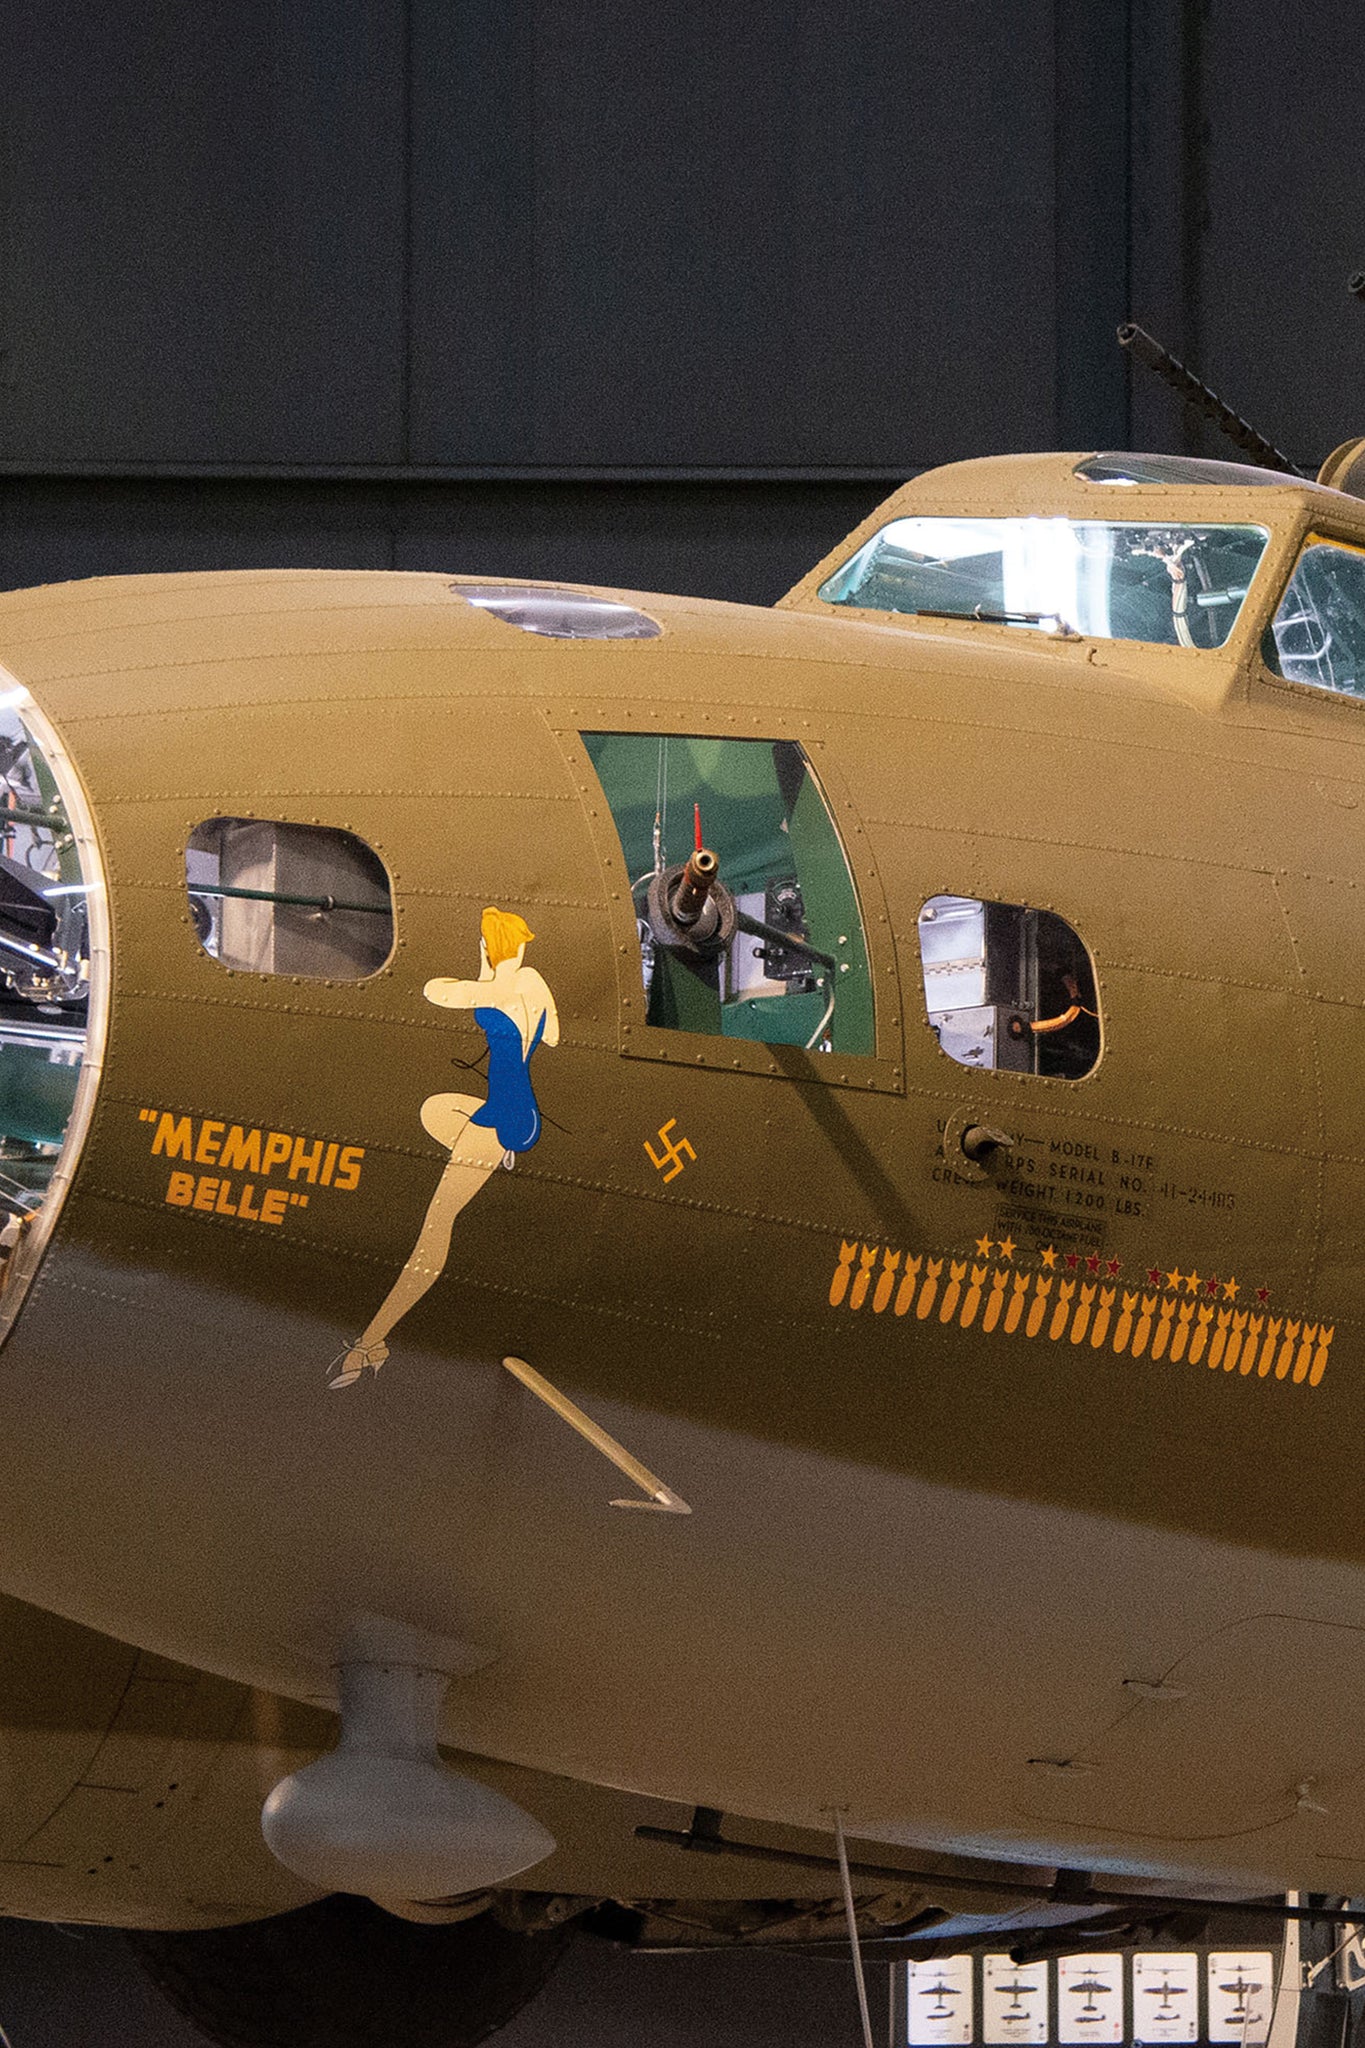 Boeing B-17F Flying Fortress 'Memphis Belle'